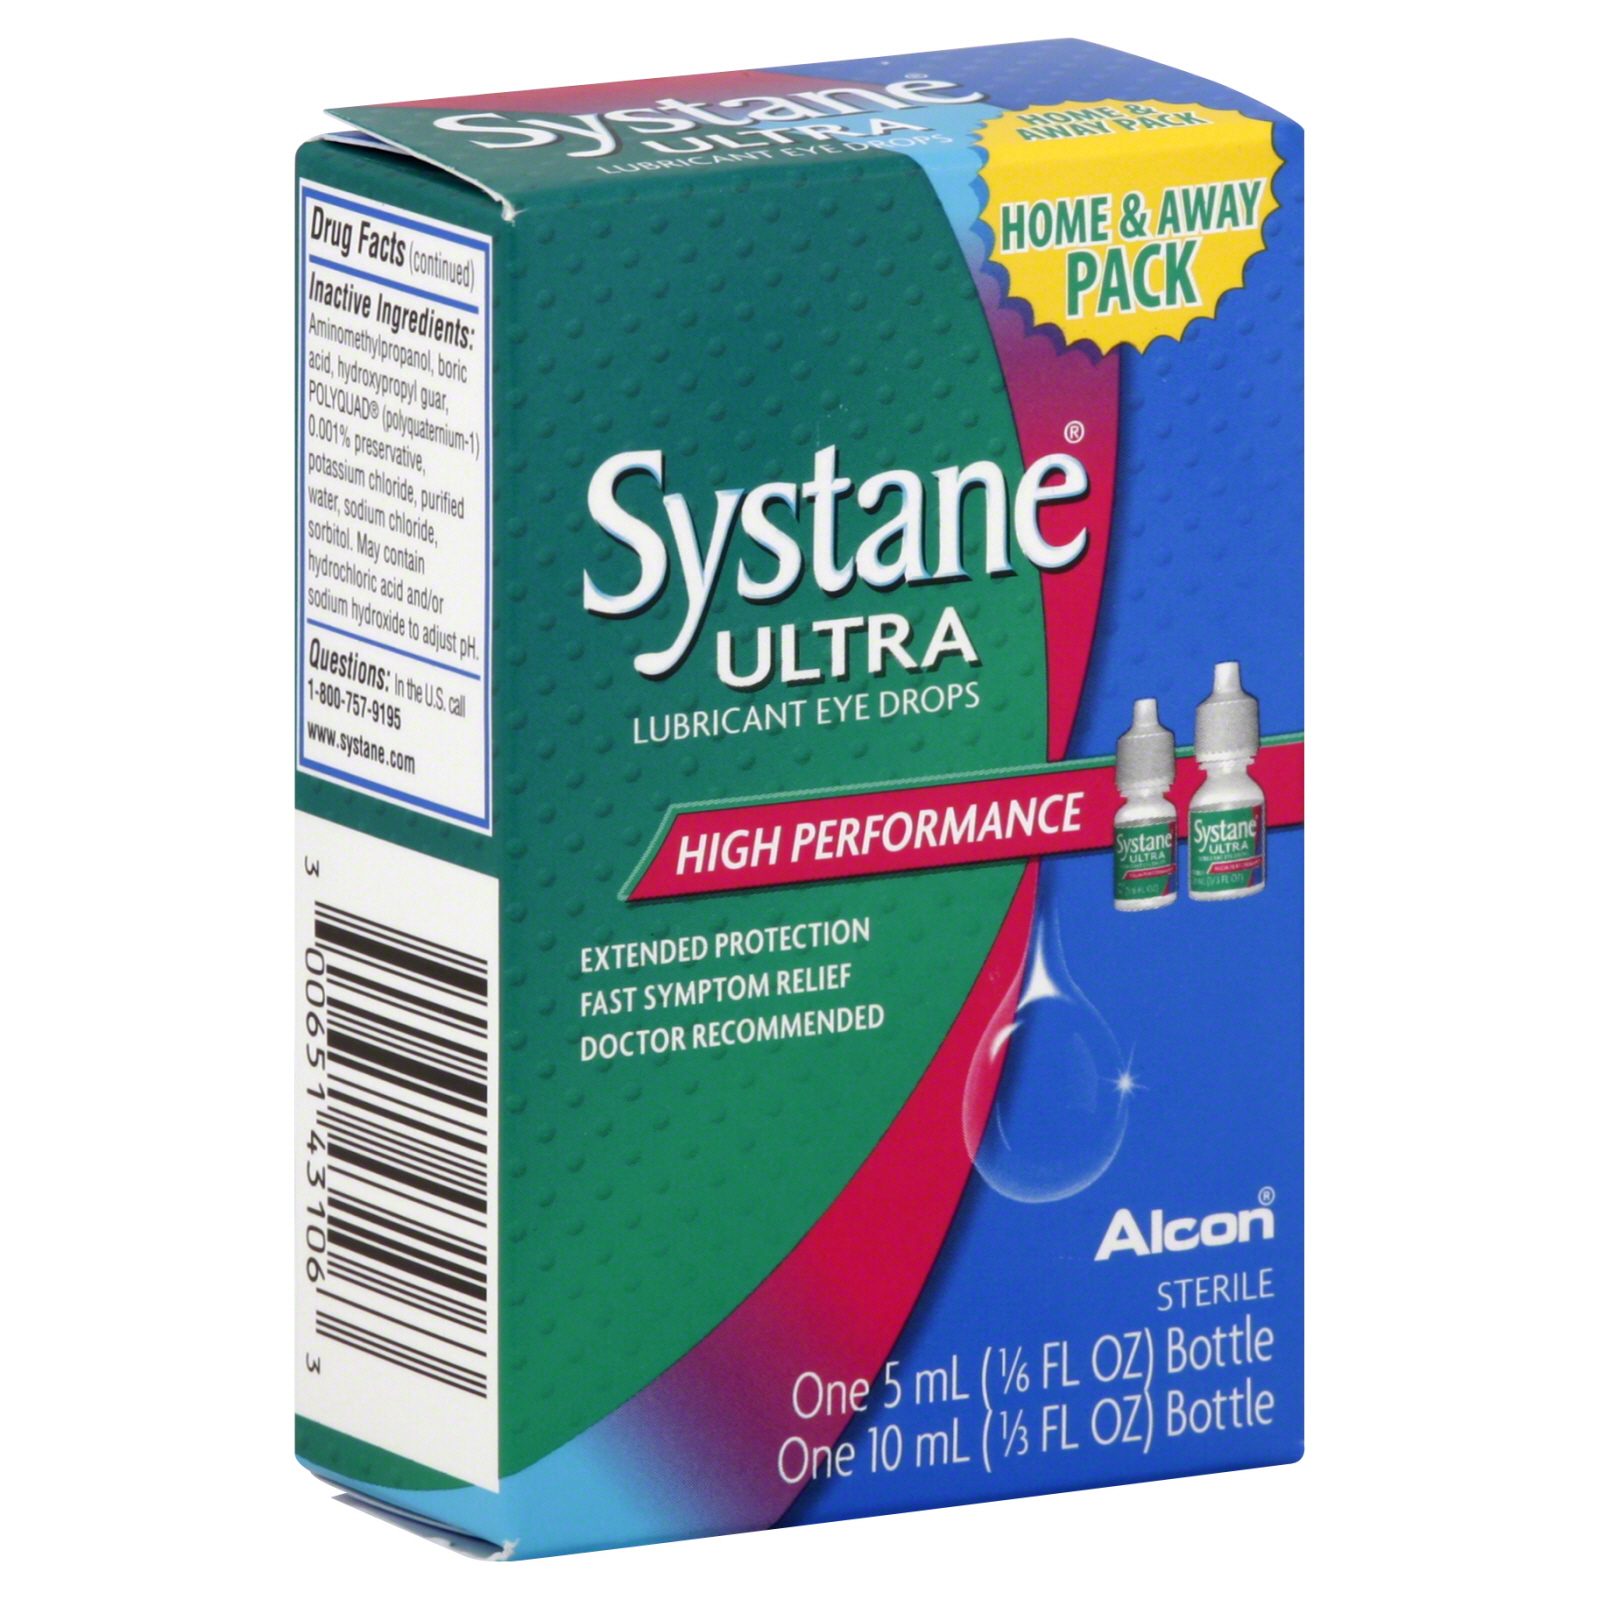 Alcon Systane Ultra Eye Drops, Lubricant, High Performance, 2 bottles